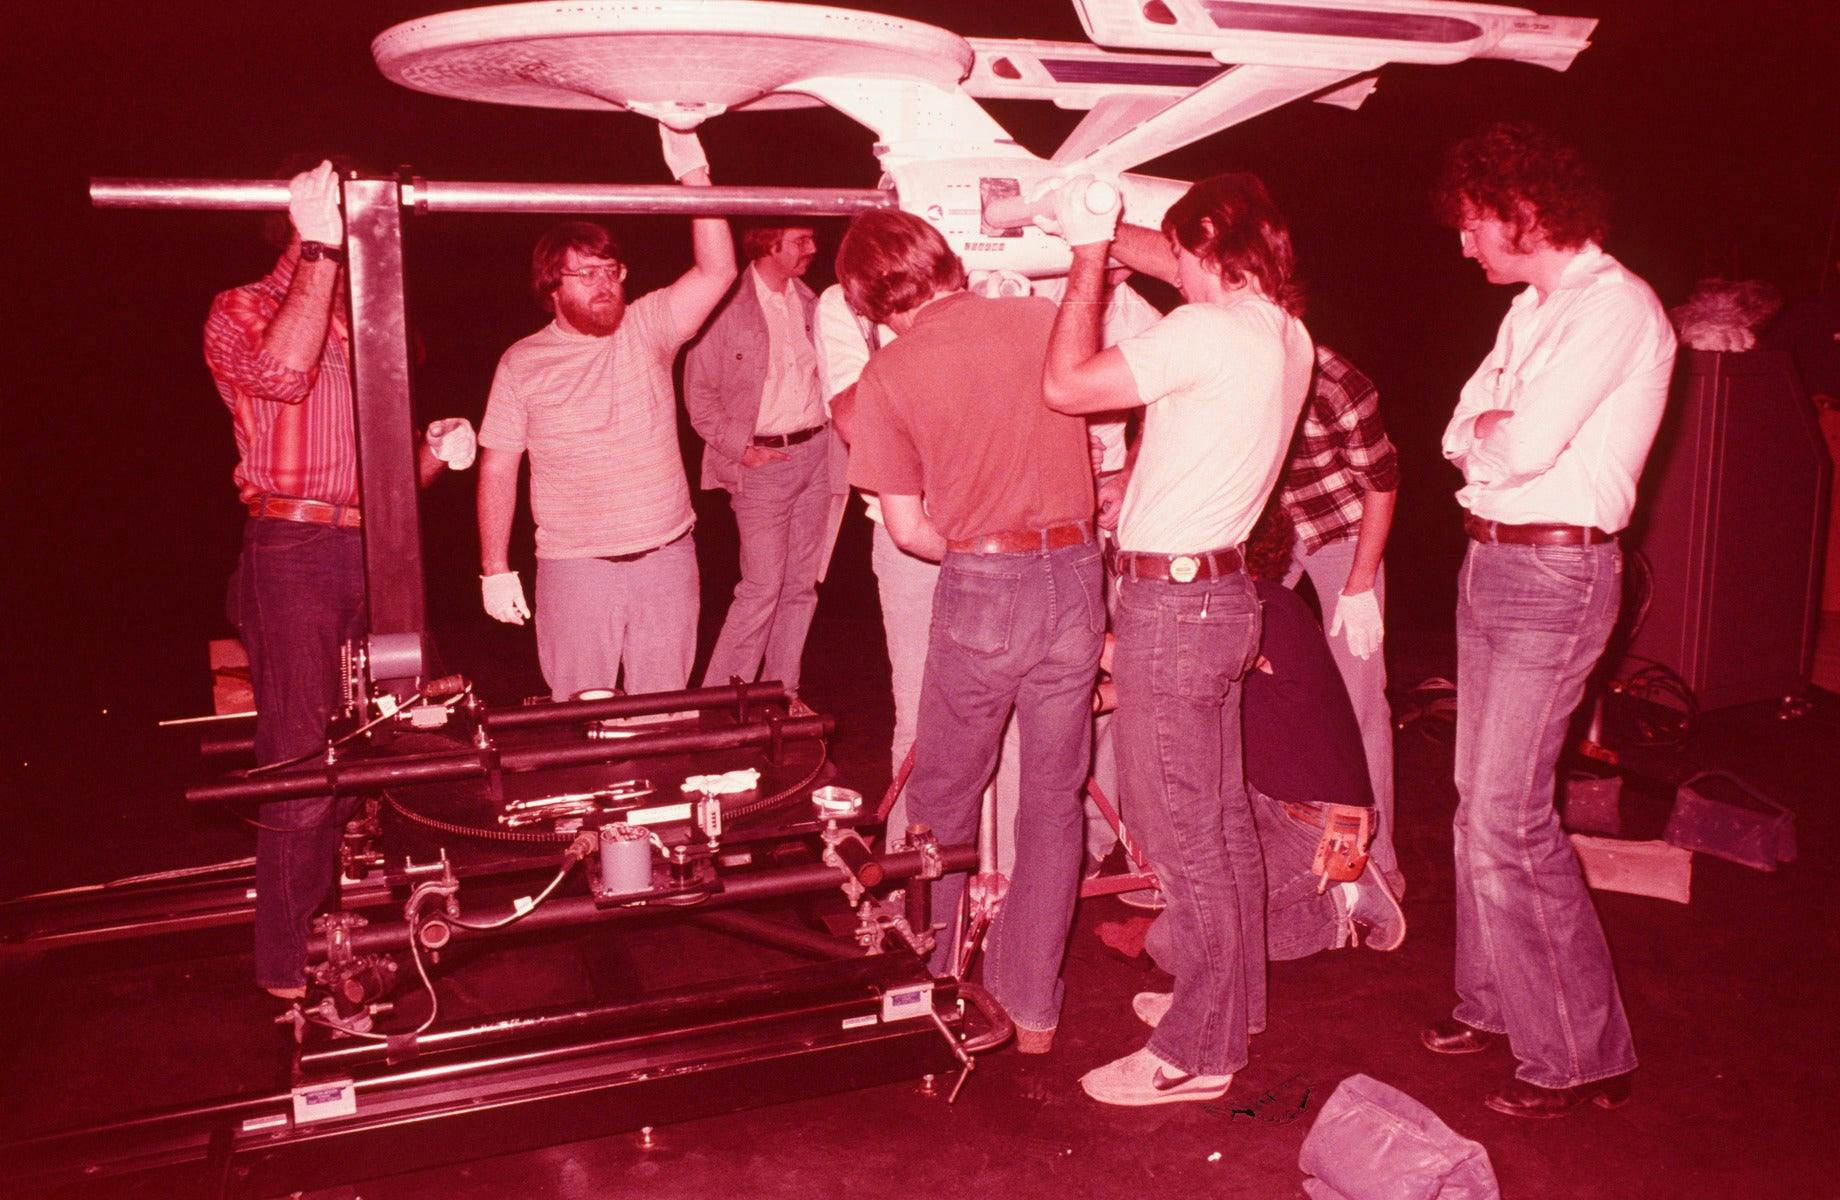 Rarely Seen BTS Photo of Star Trek: The Motion Picture